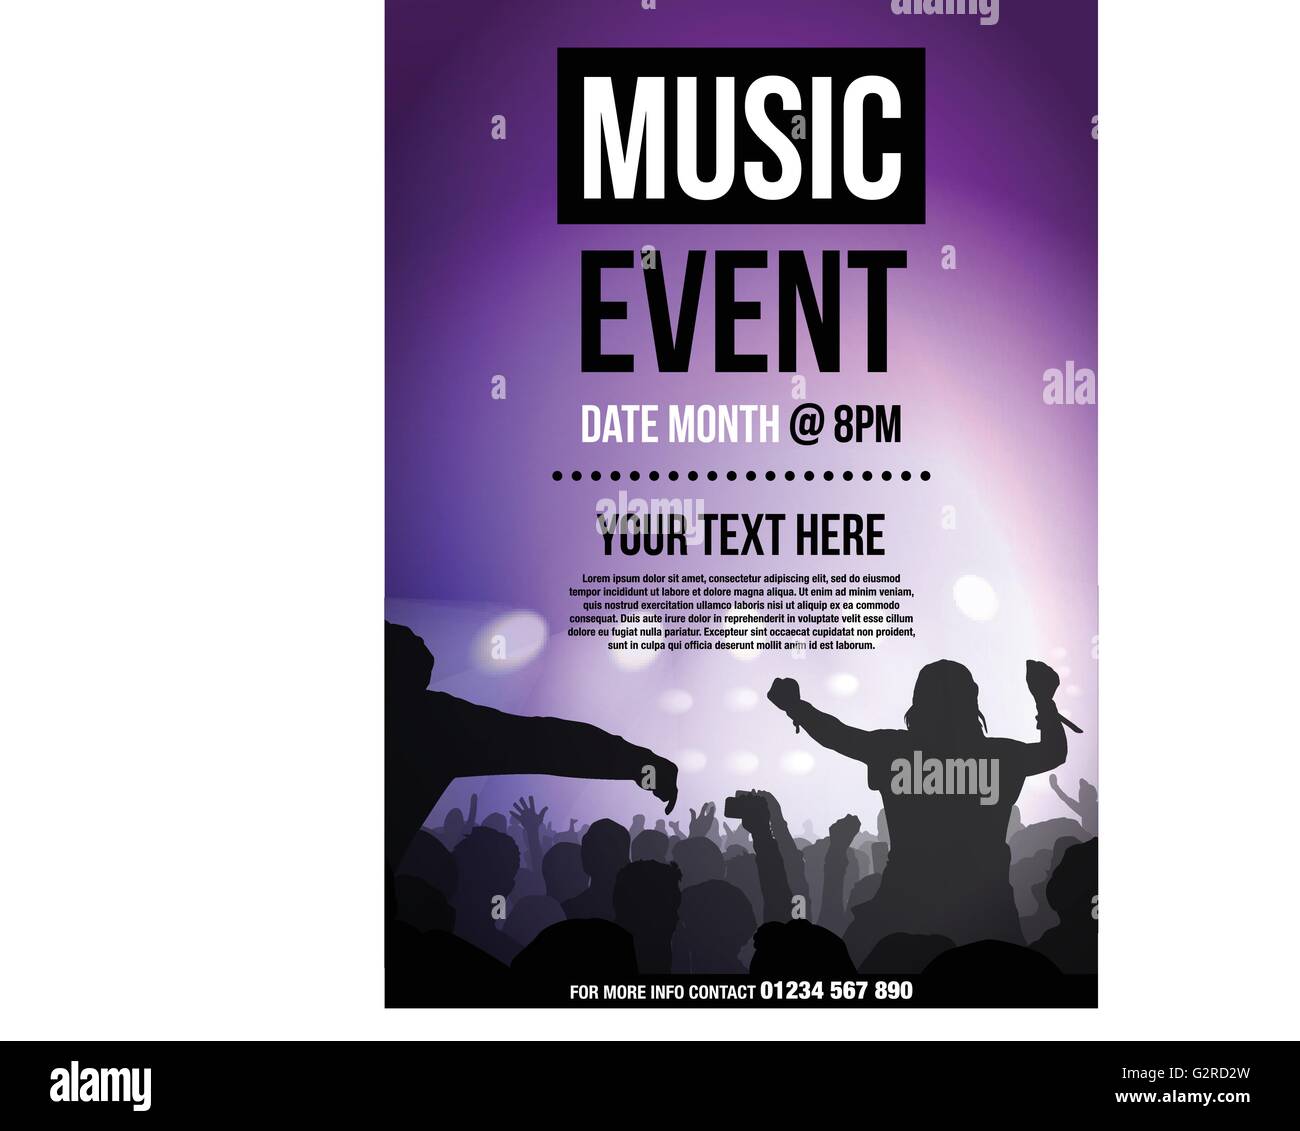 Template For Poster Advertising Music Event Stock Vector